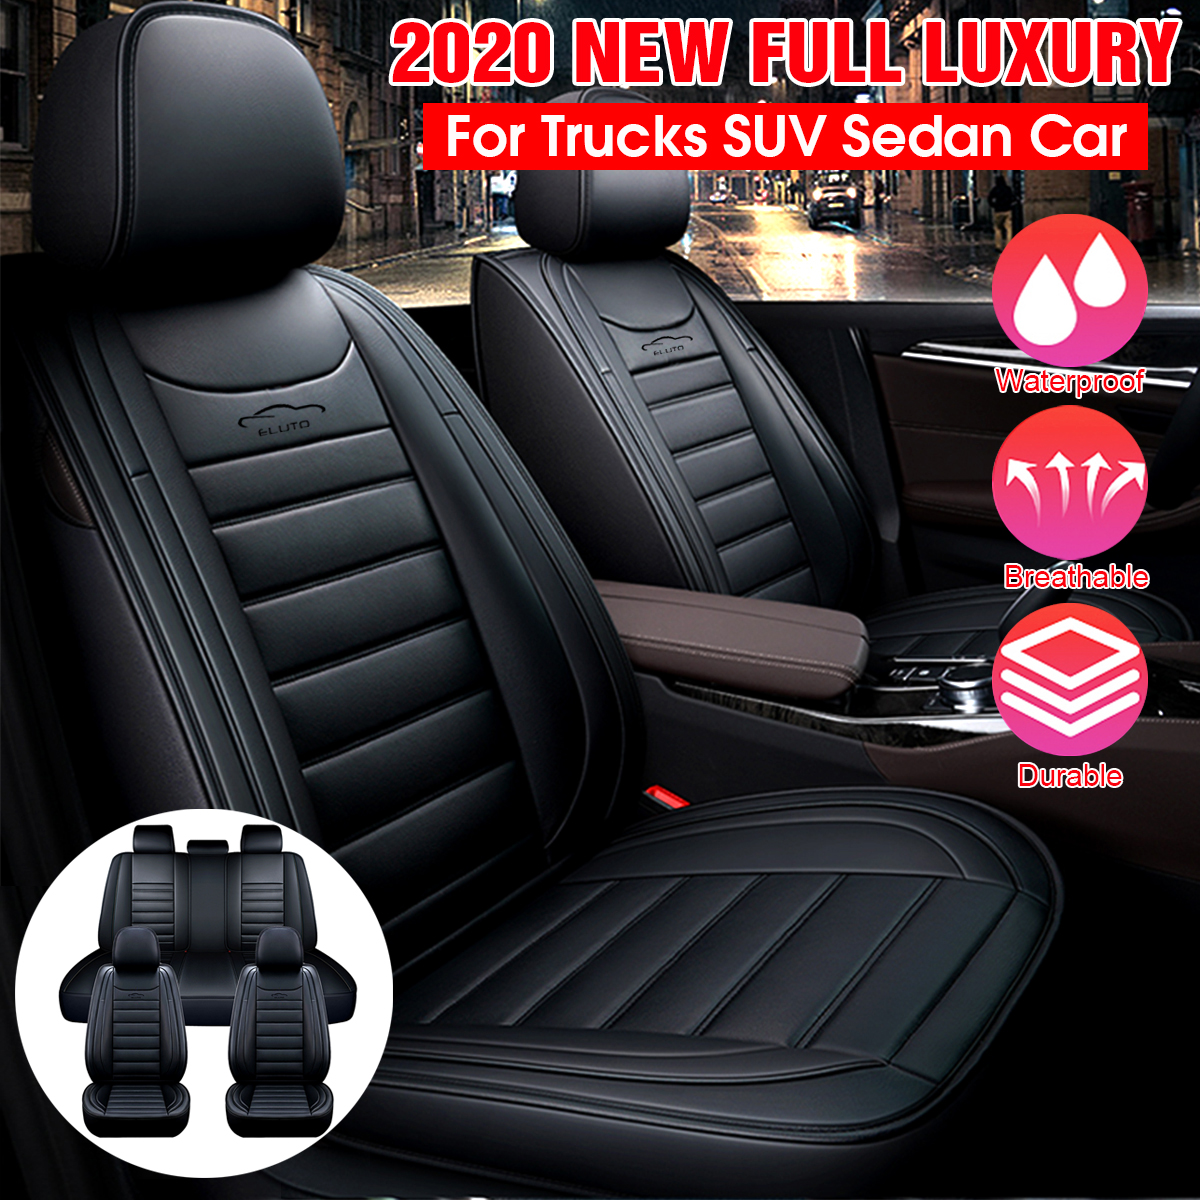 Comfortable Car Seat Cover Cushions PU Leather For Interior Accessory Universal